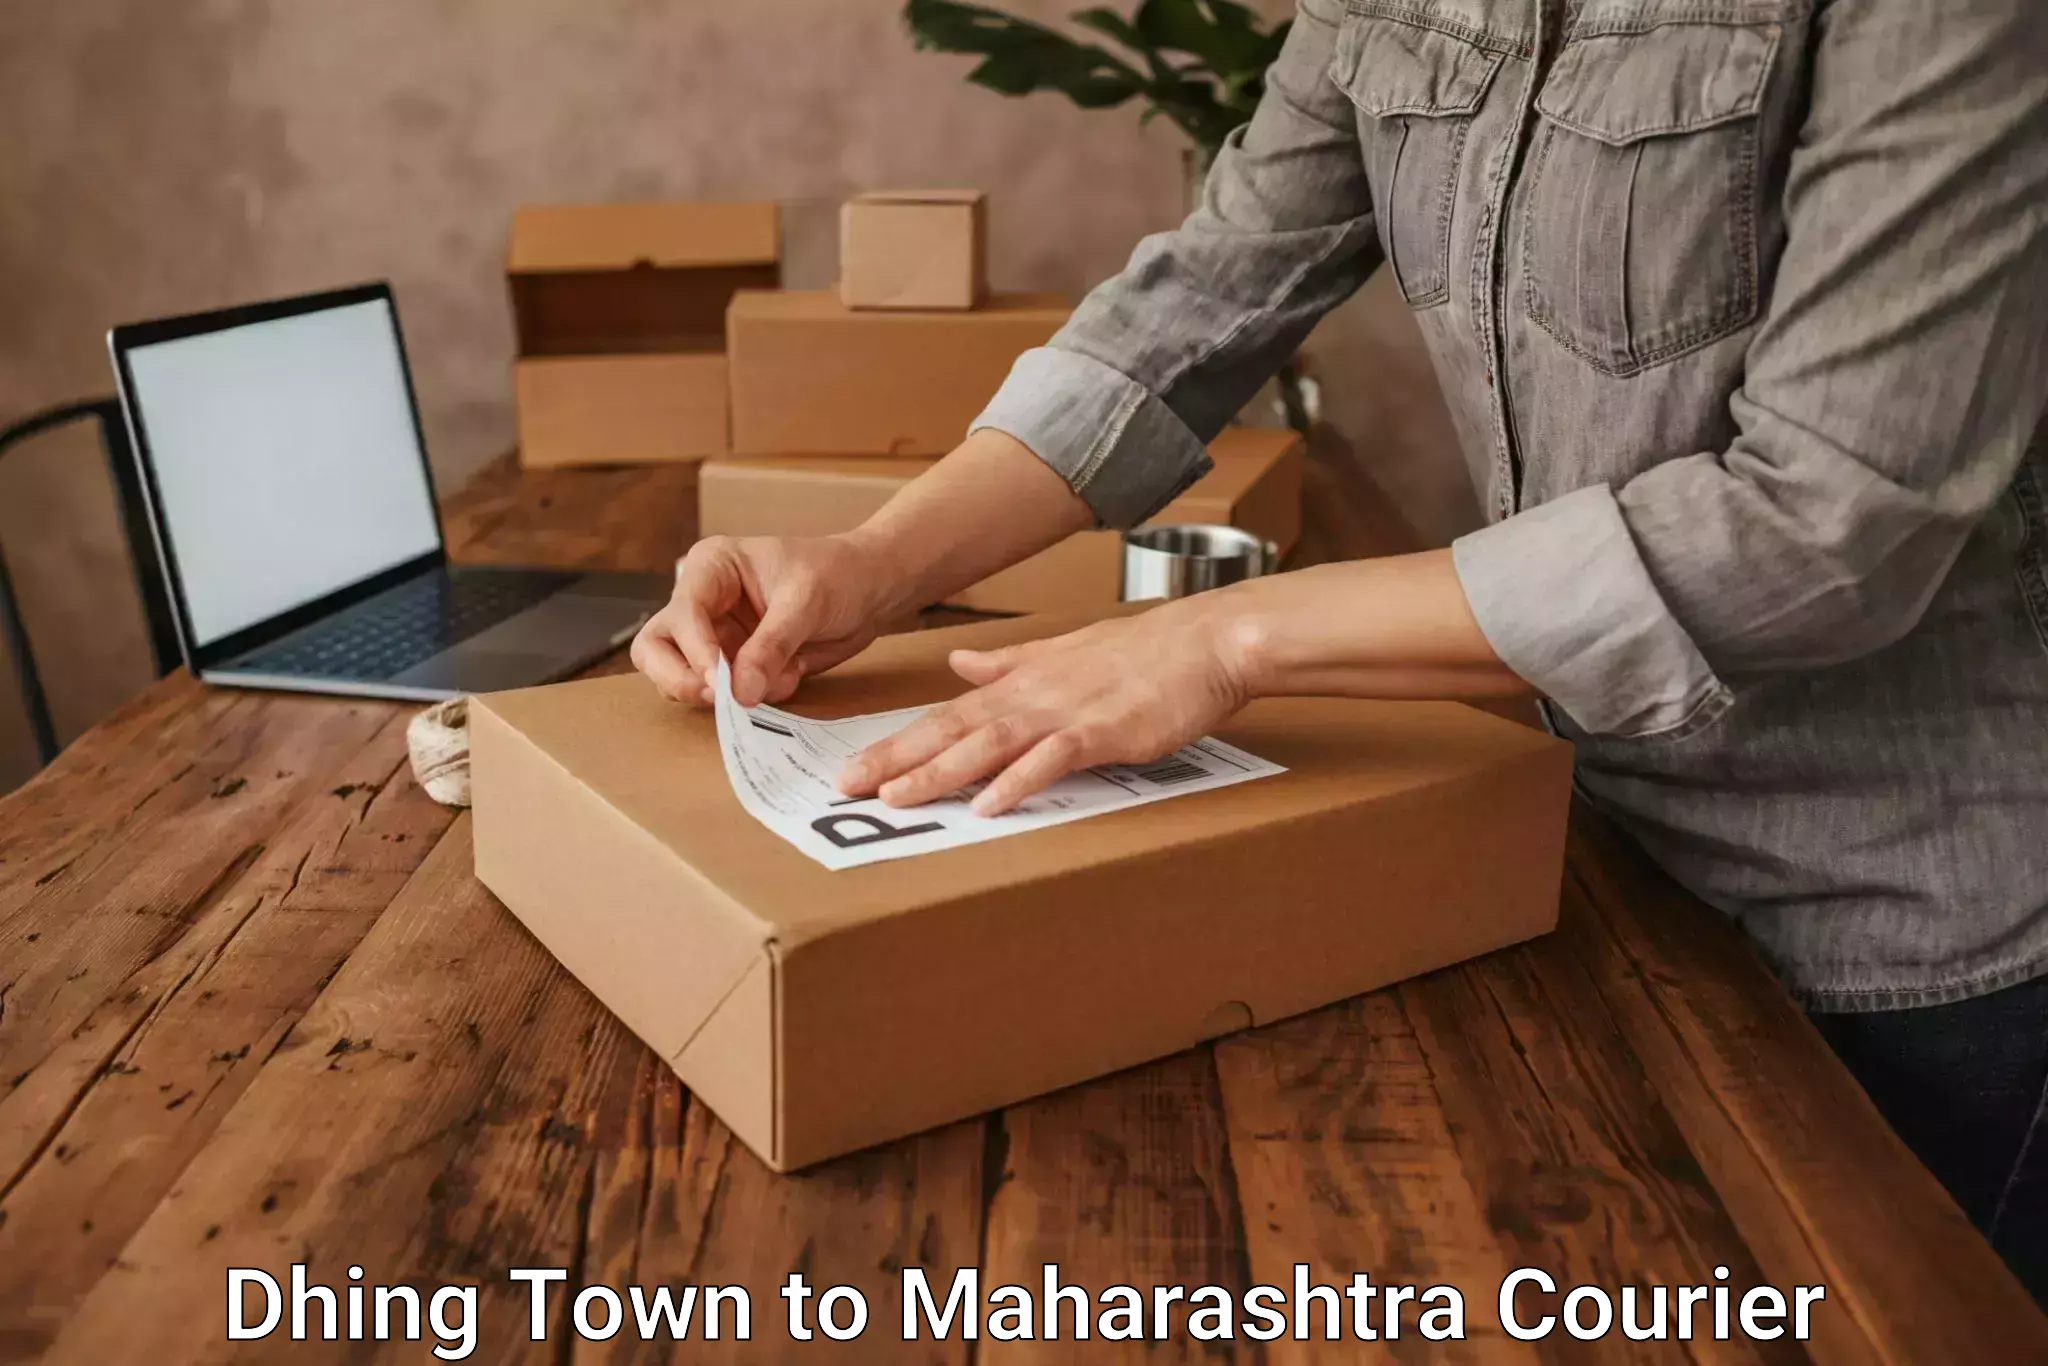 Nationwide parcel services Dhing Town to Worli